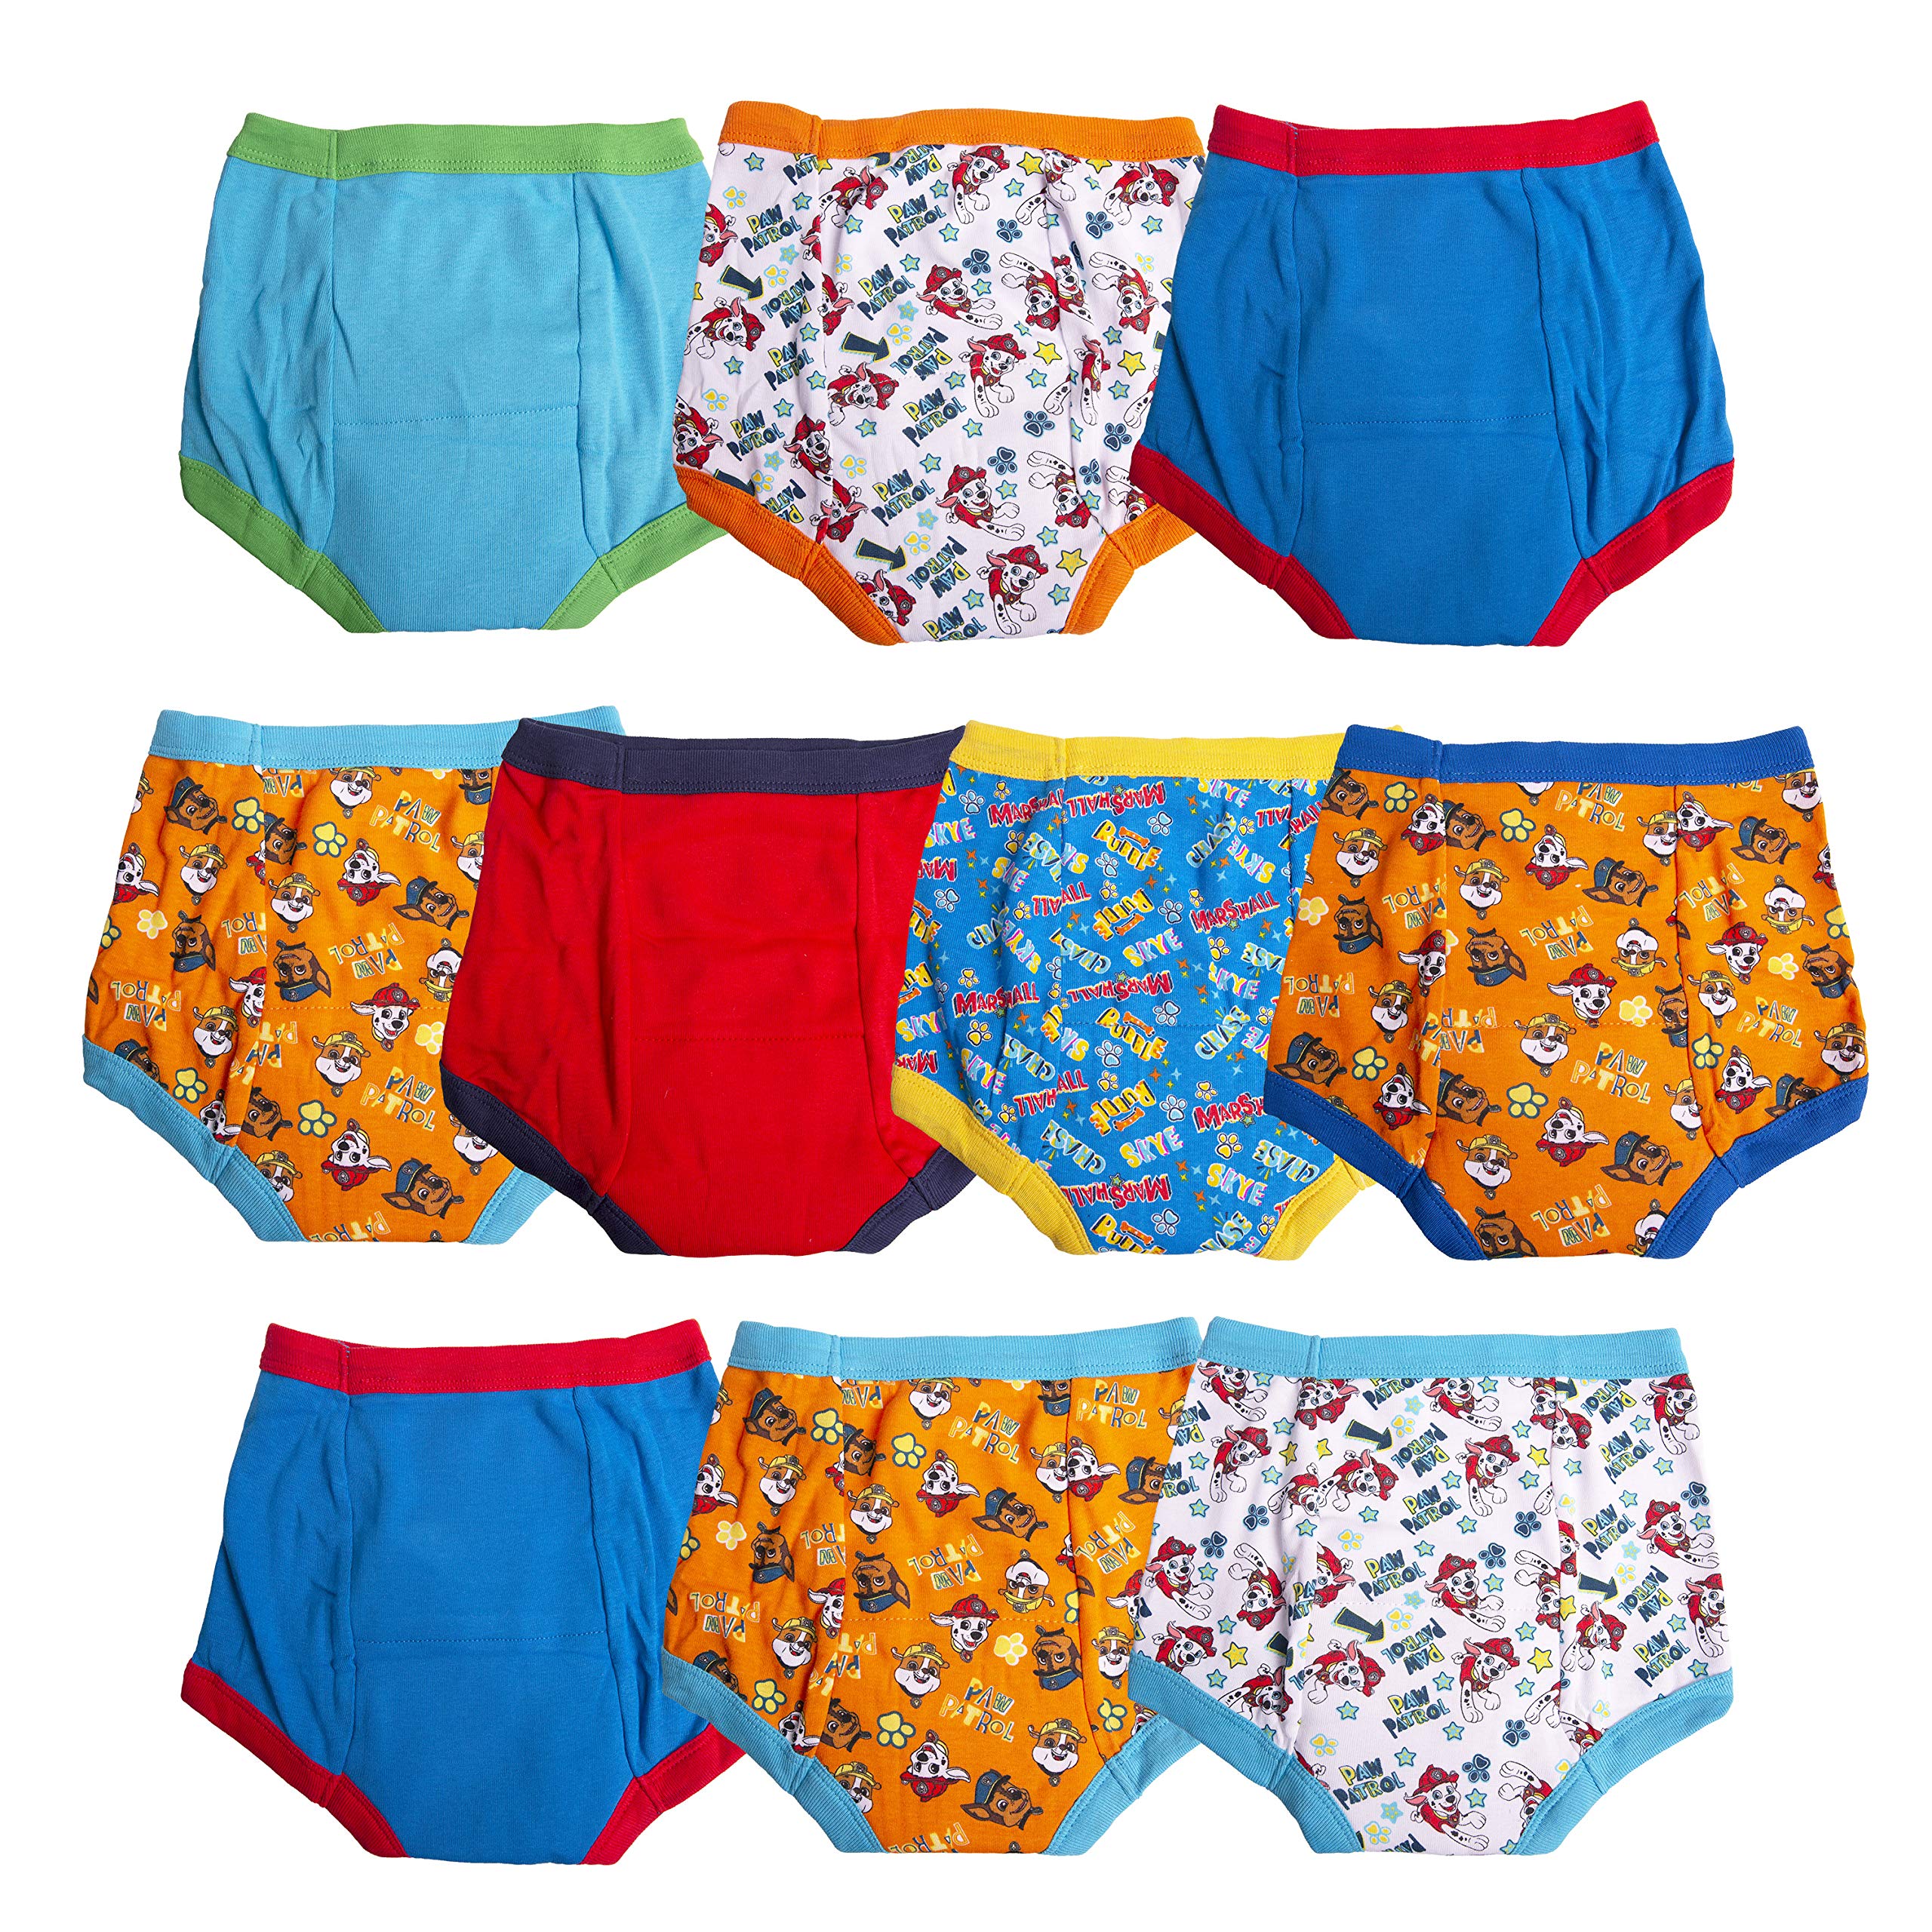 Buy Nickelodeon Boys Toddler Potty Training Pants with Chase, Skye